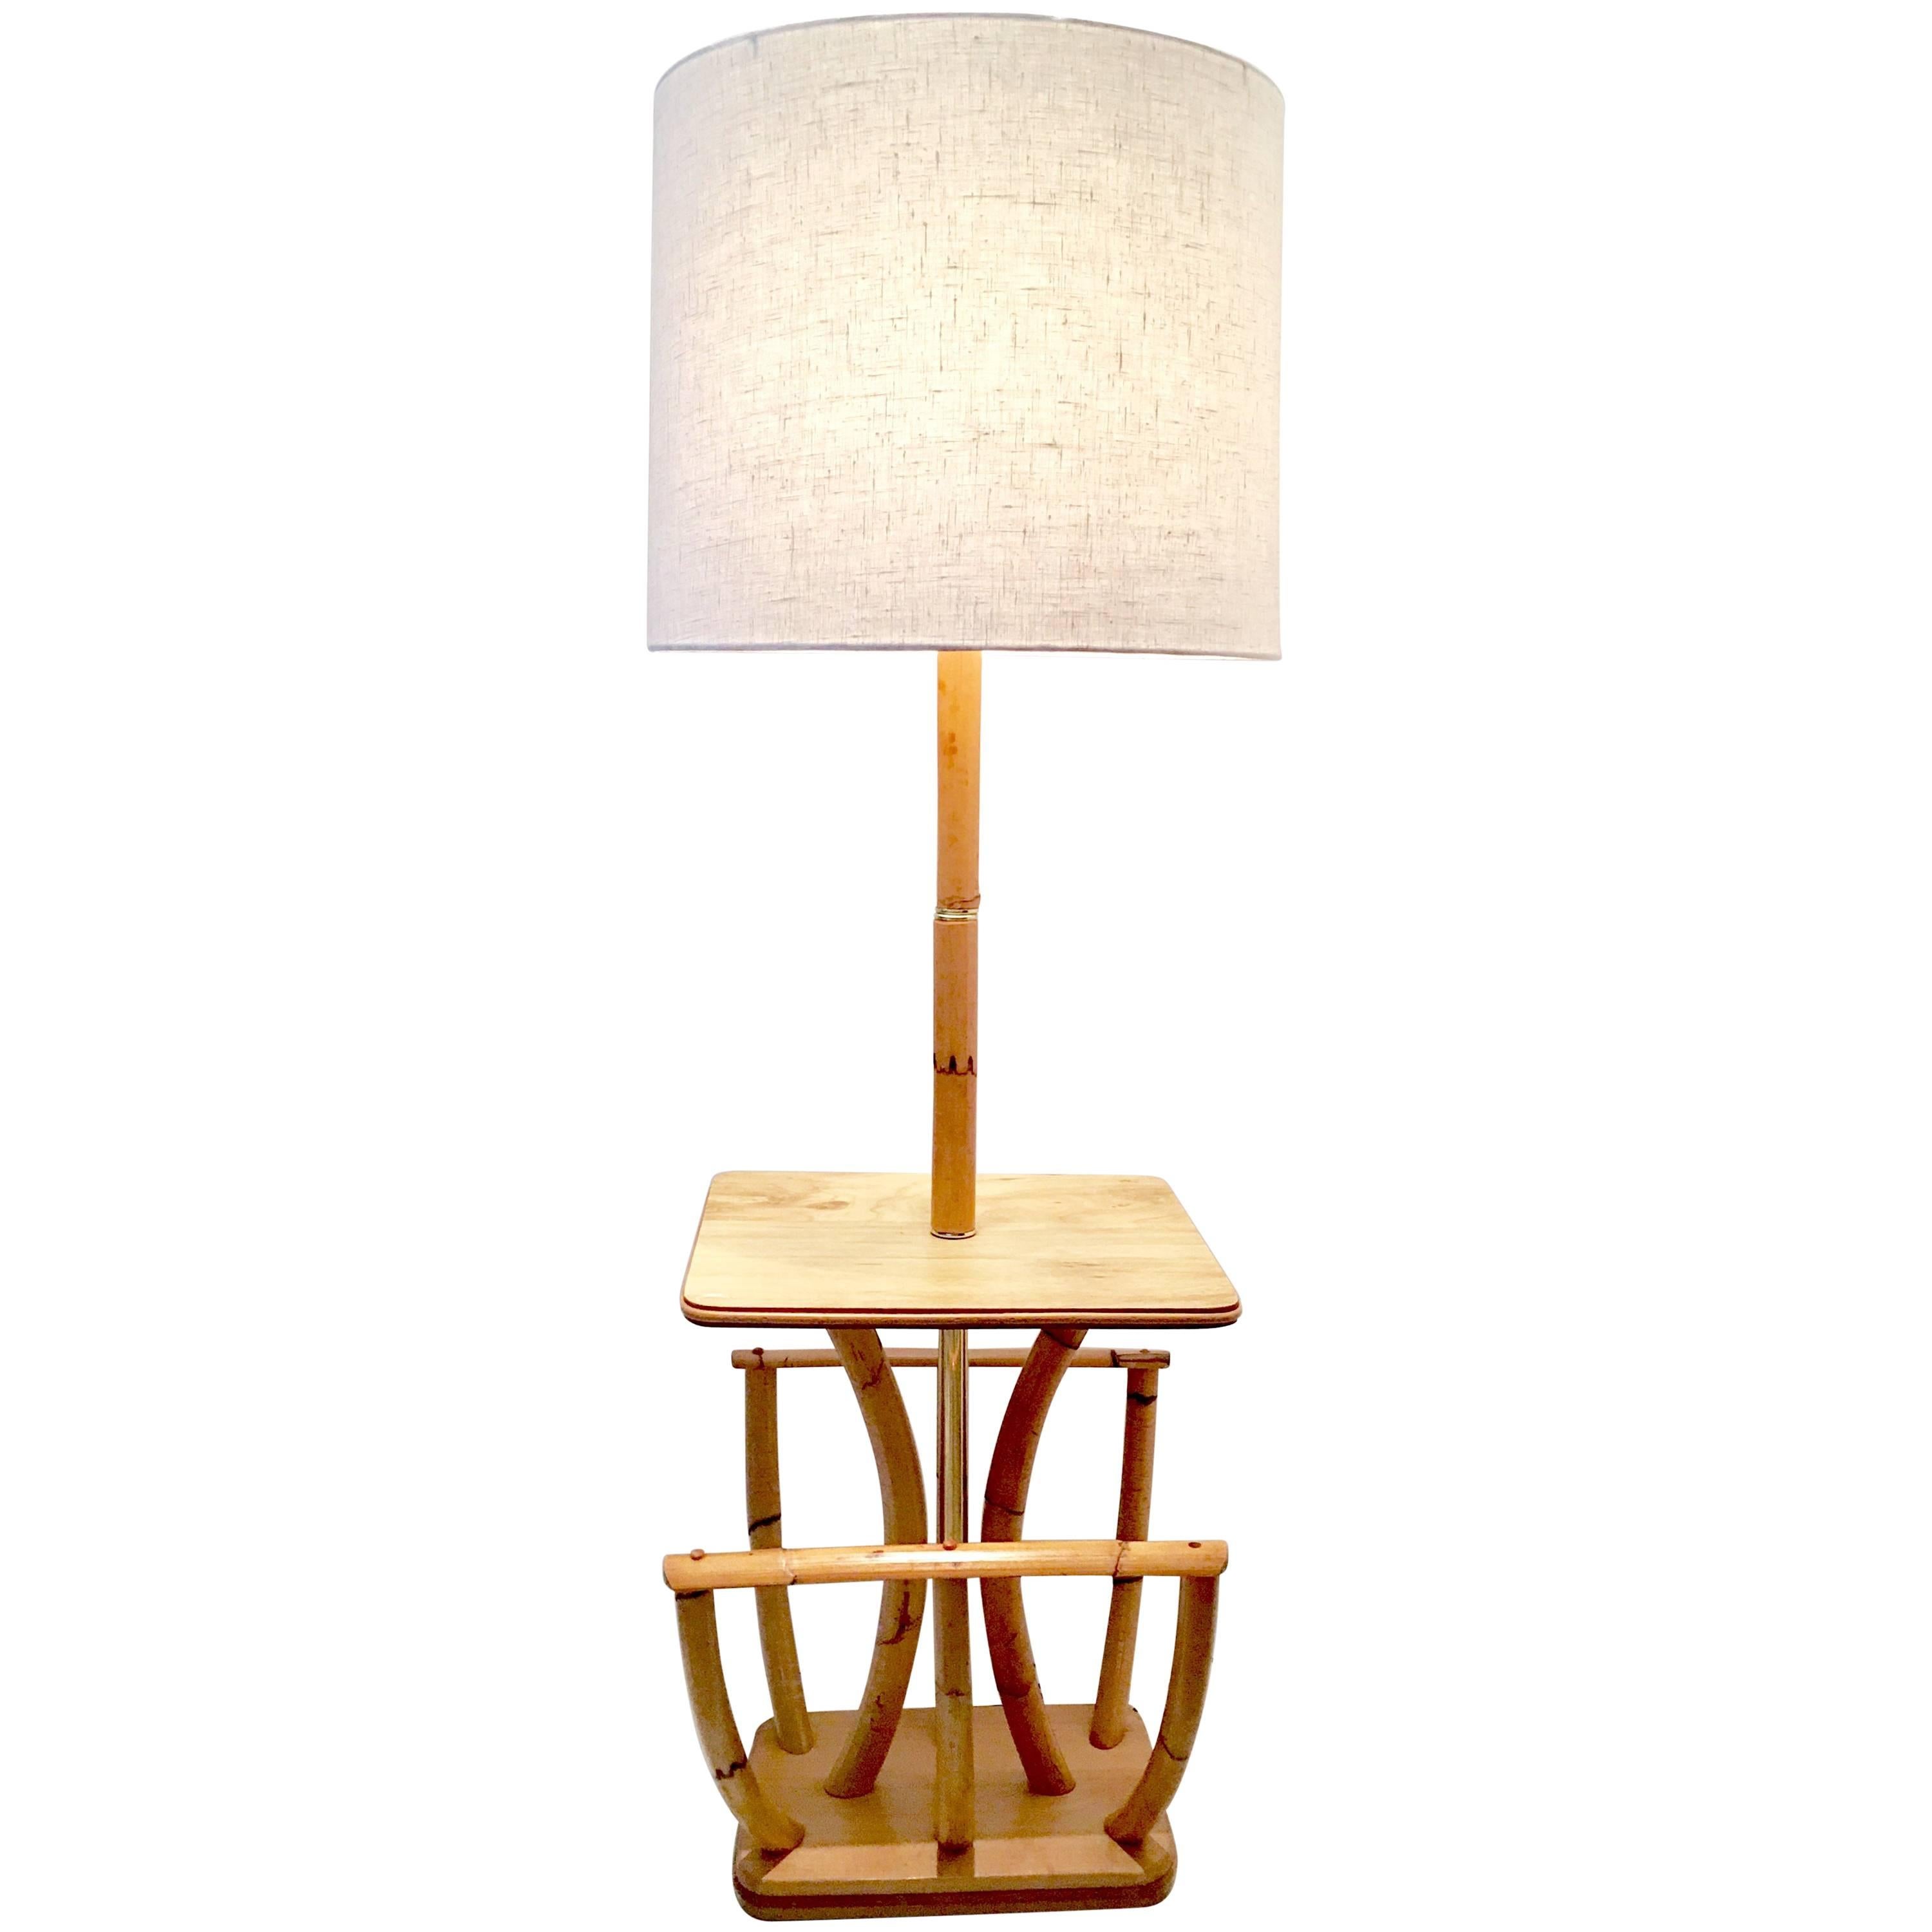 1930s Paul Frankl style rattan reed and brass floor table lamp with magazine rack. This unique and rare floor lamp features a center polished brass pole and ring detail with a large magazine rack and mahogany platform base. Includes brass finial and